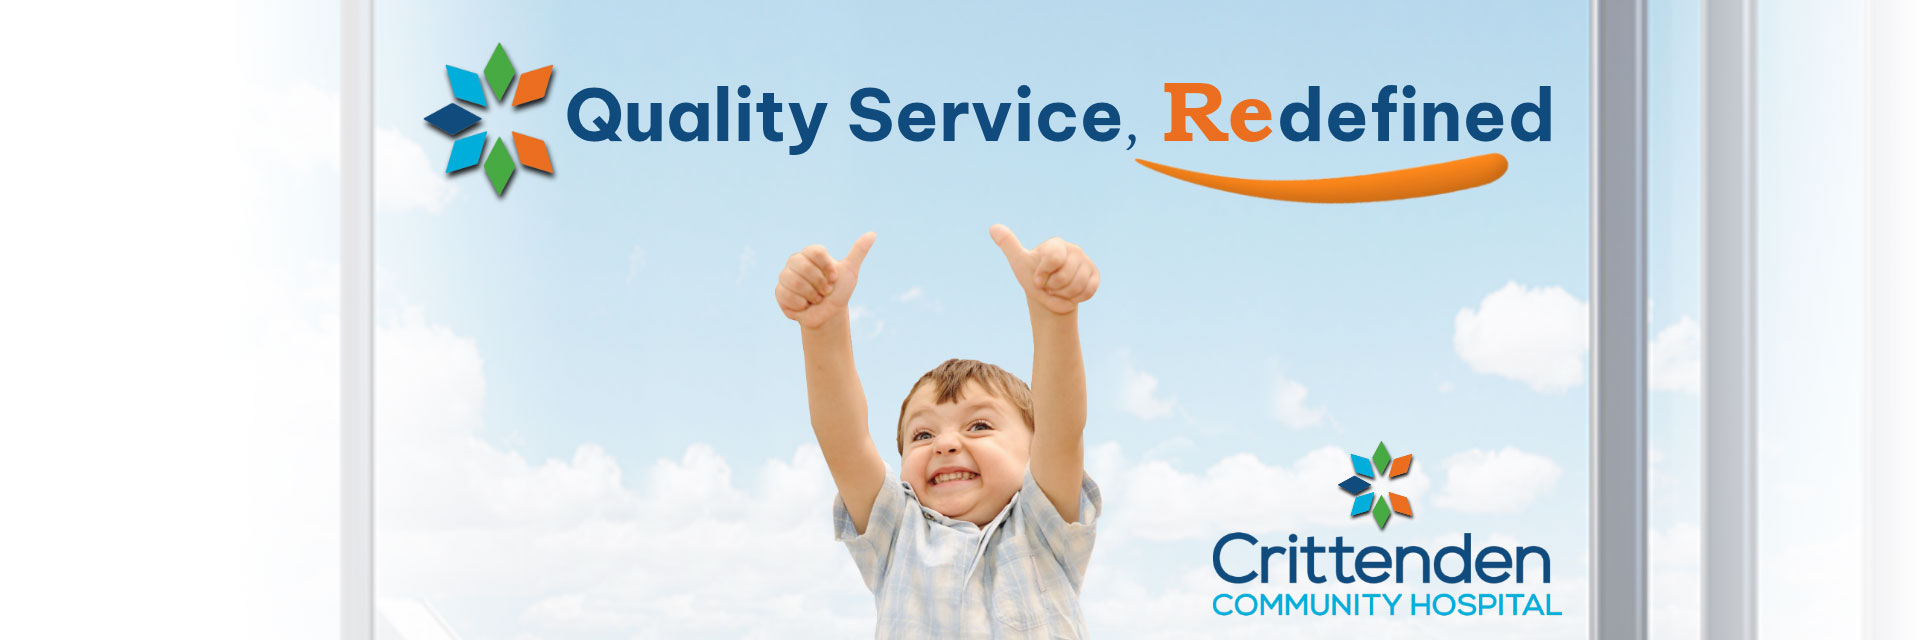 Banner picture of a little boy giving two thumbs up and grinning really big. Banner says:

Quality Services, Redefined
Crittenden Community Hospital